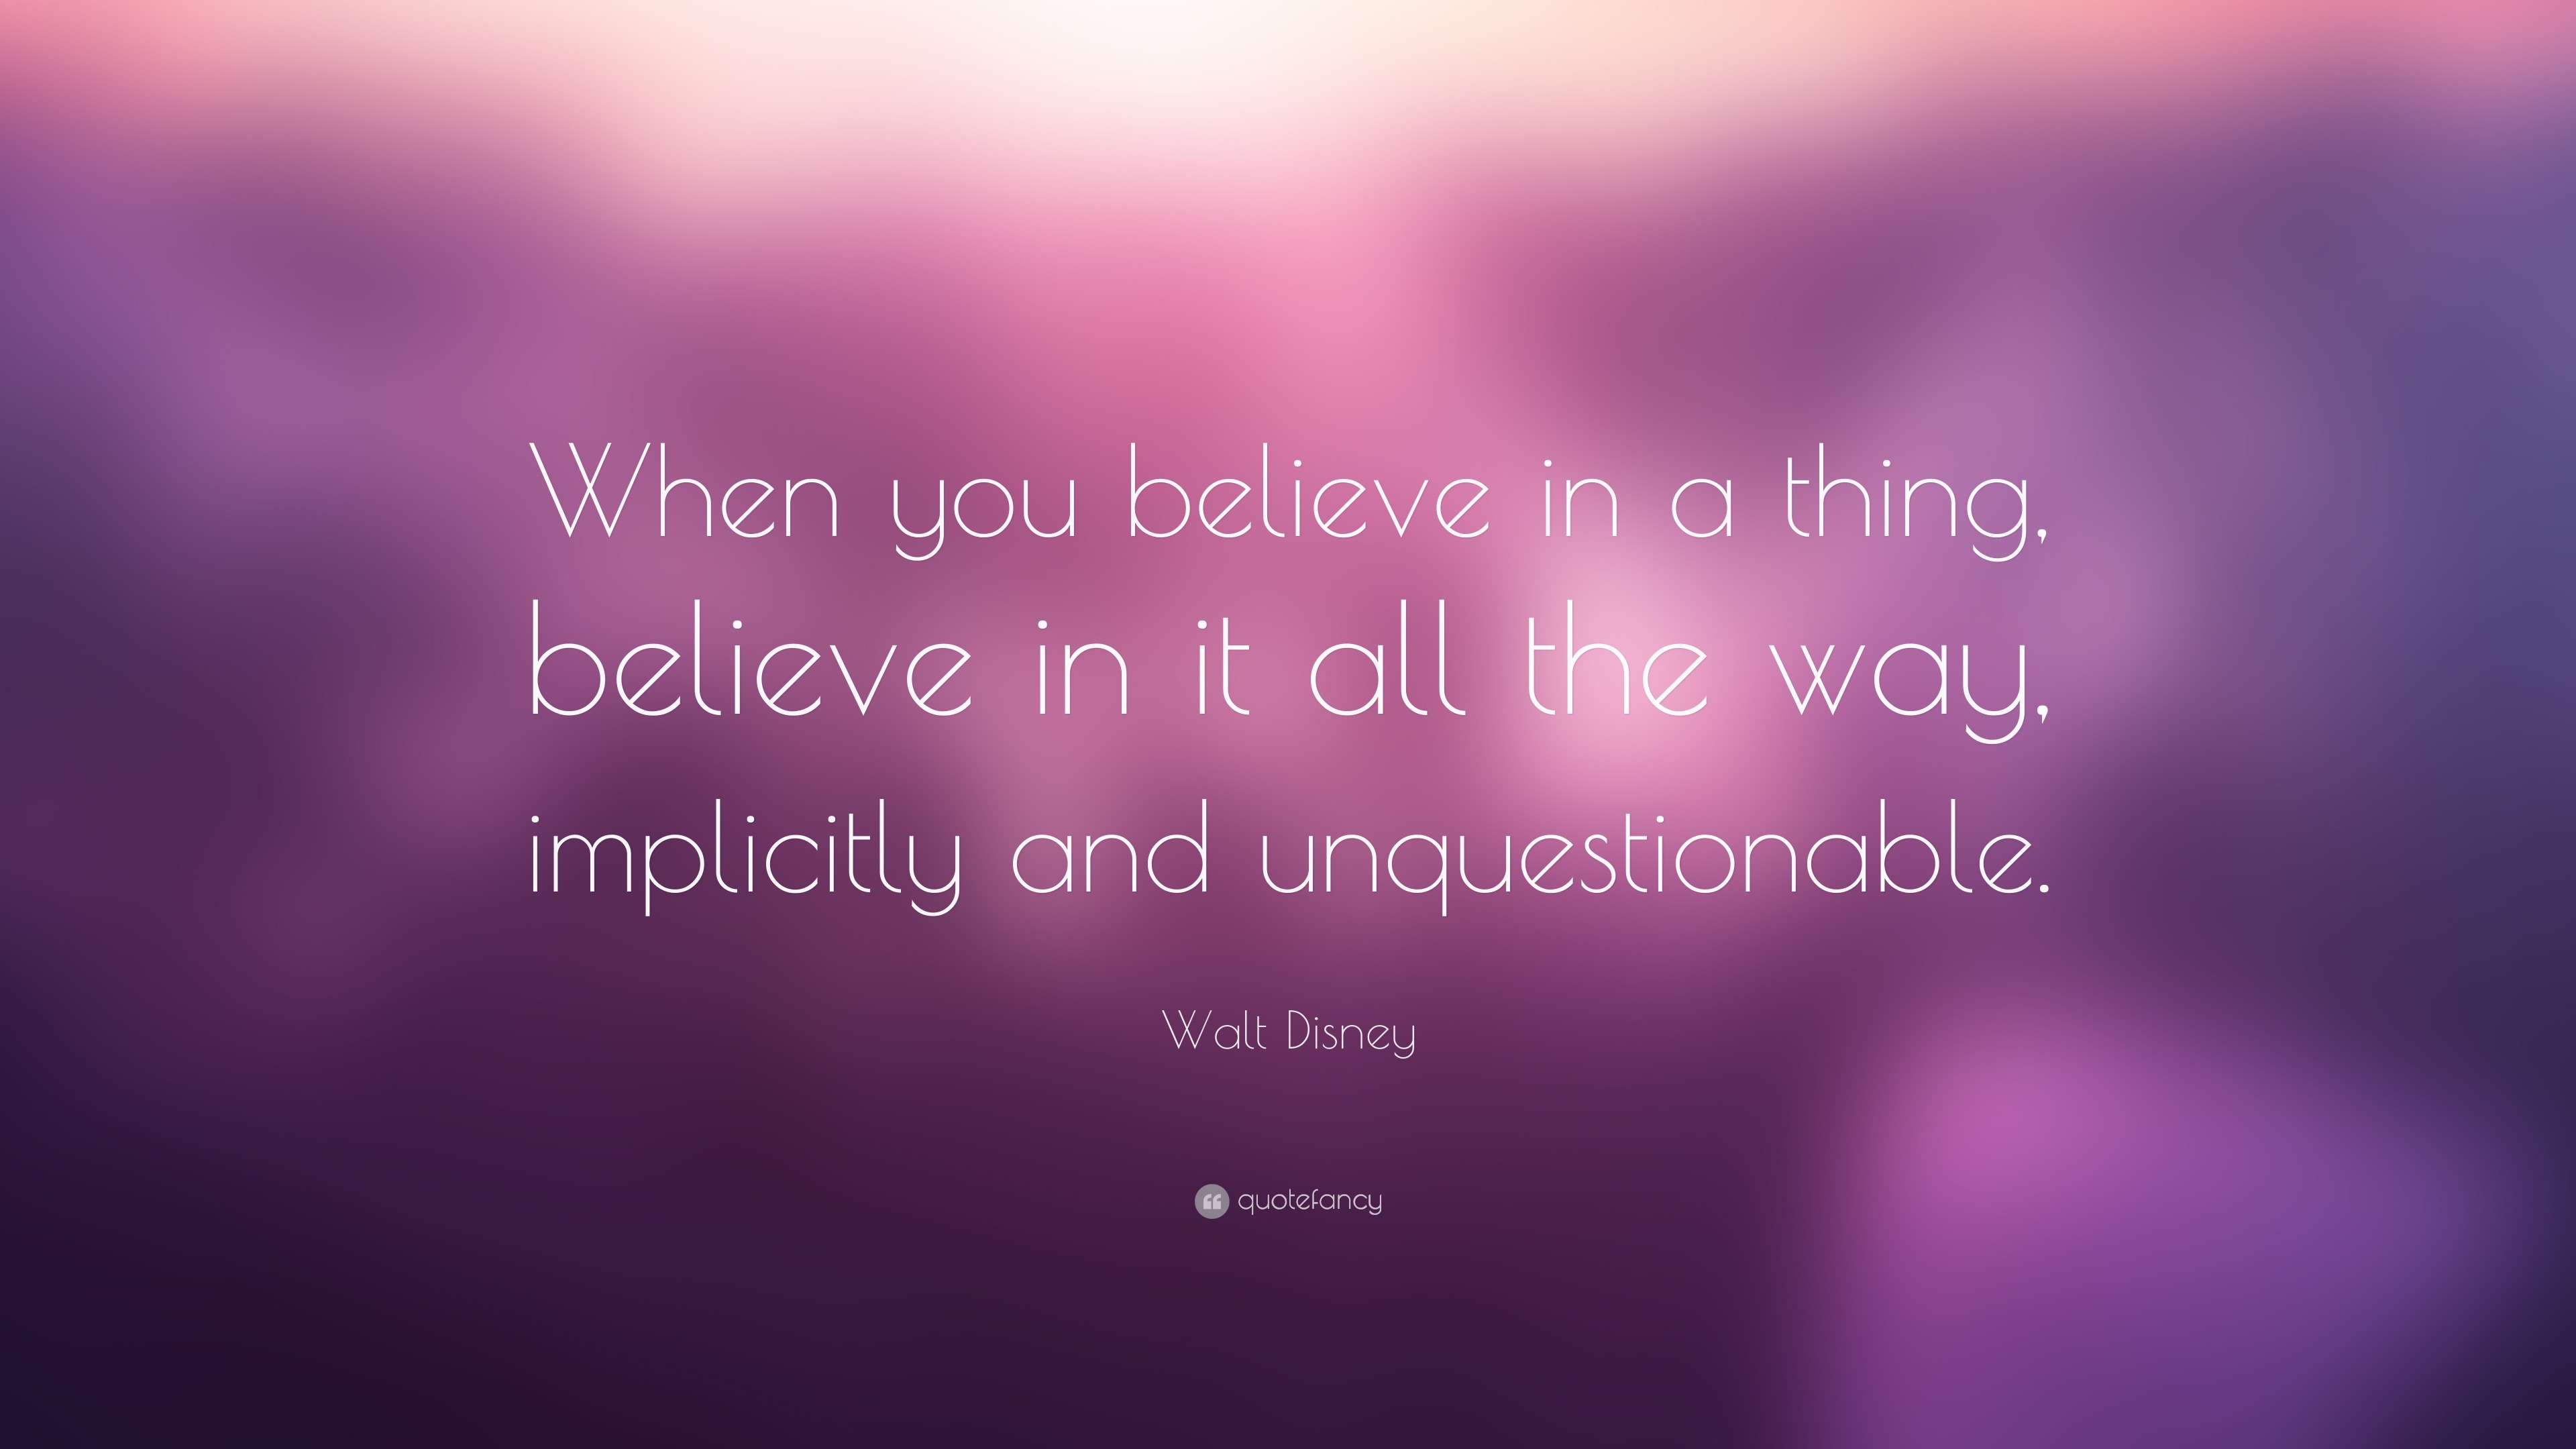 Walt Disney Quote When You Believe In A Thing Believe In It All The Way Implicitly